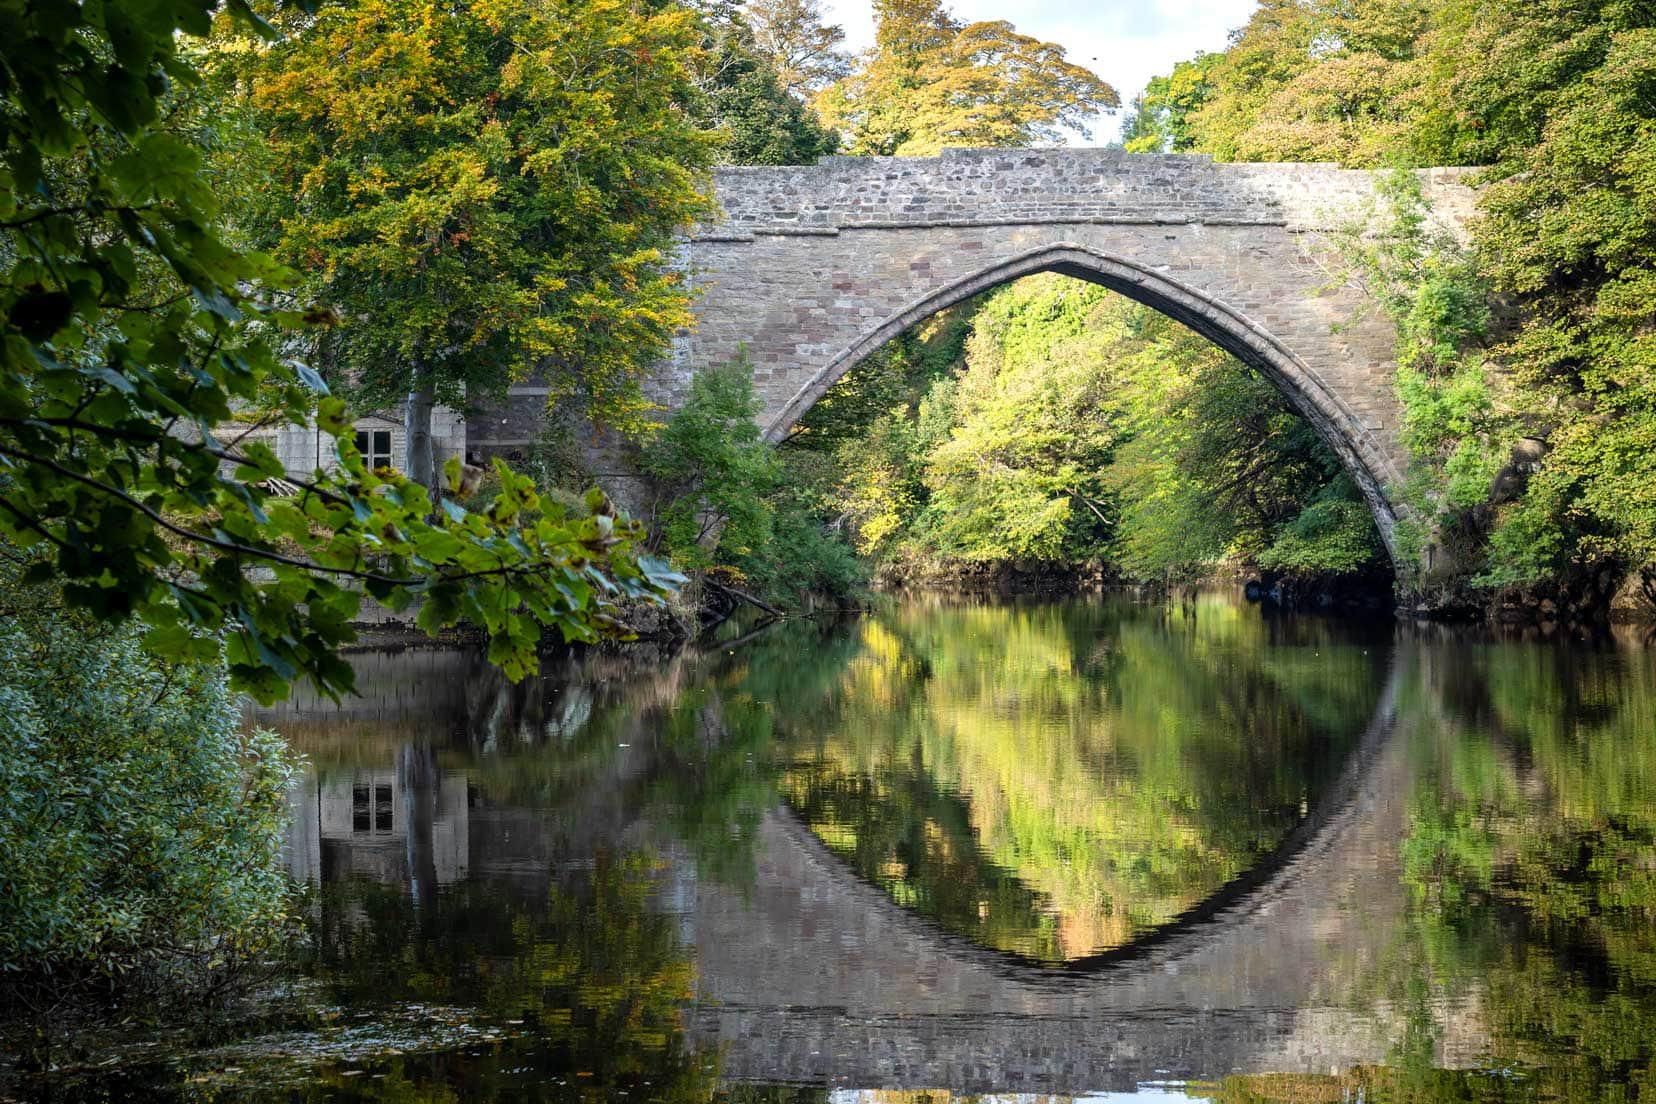 Brig O balgownie - an arched bridge over the River Don